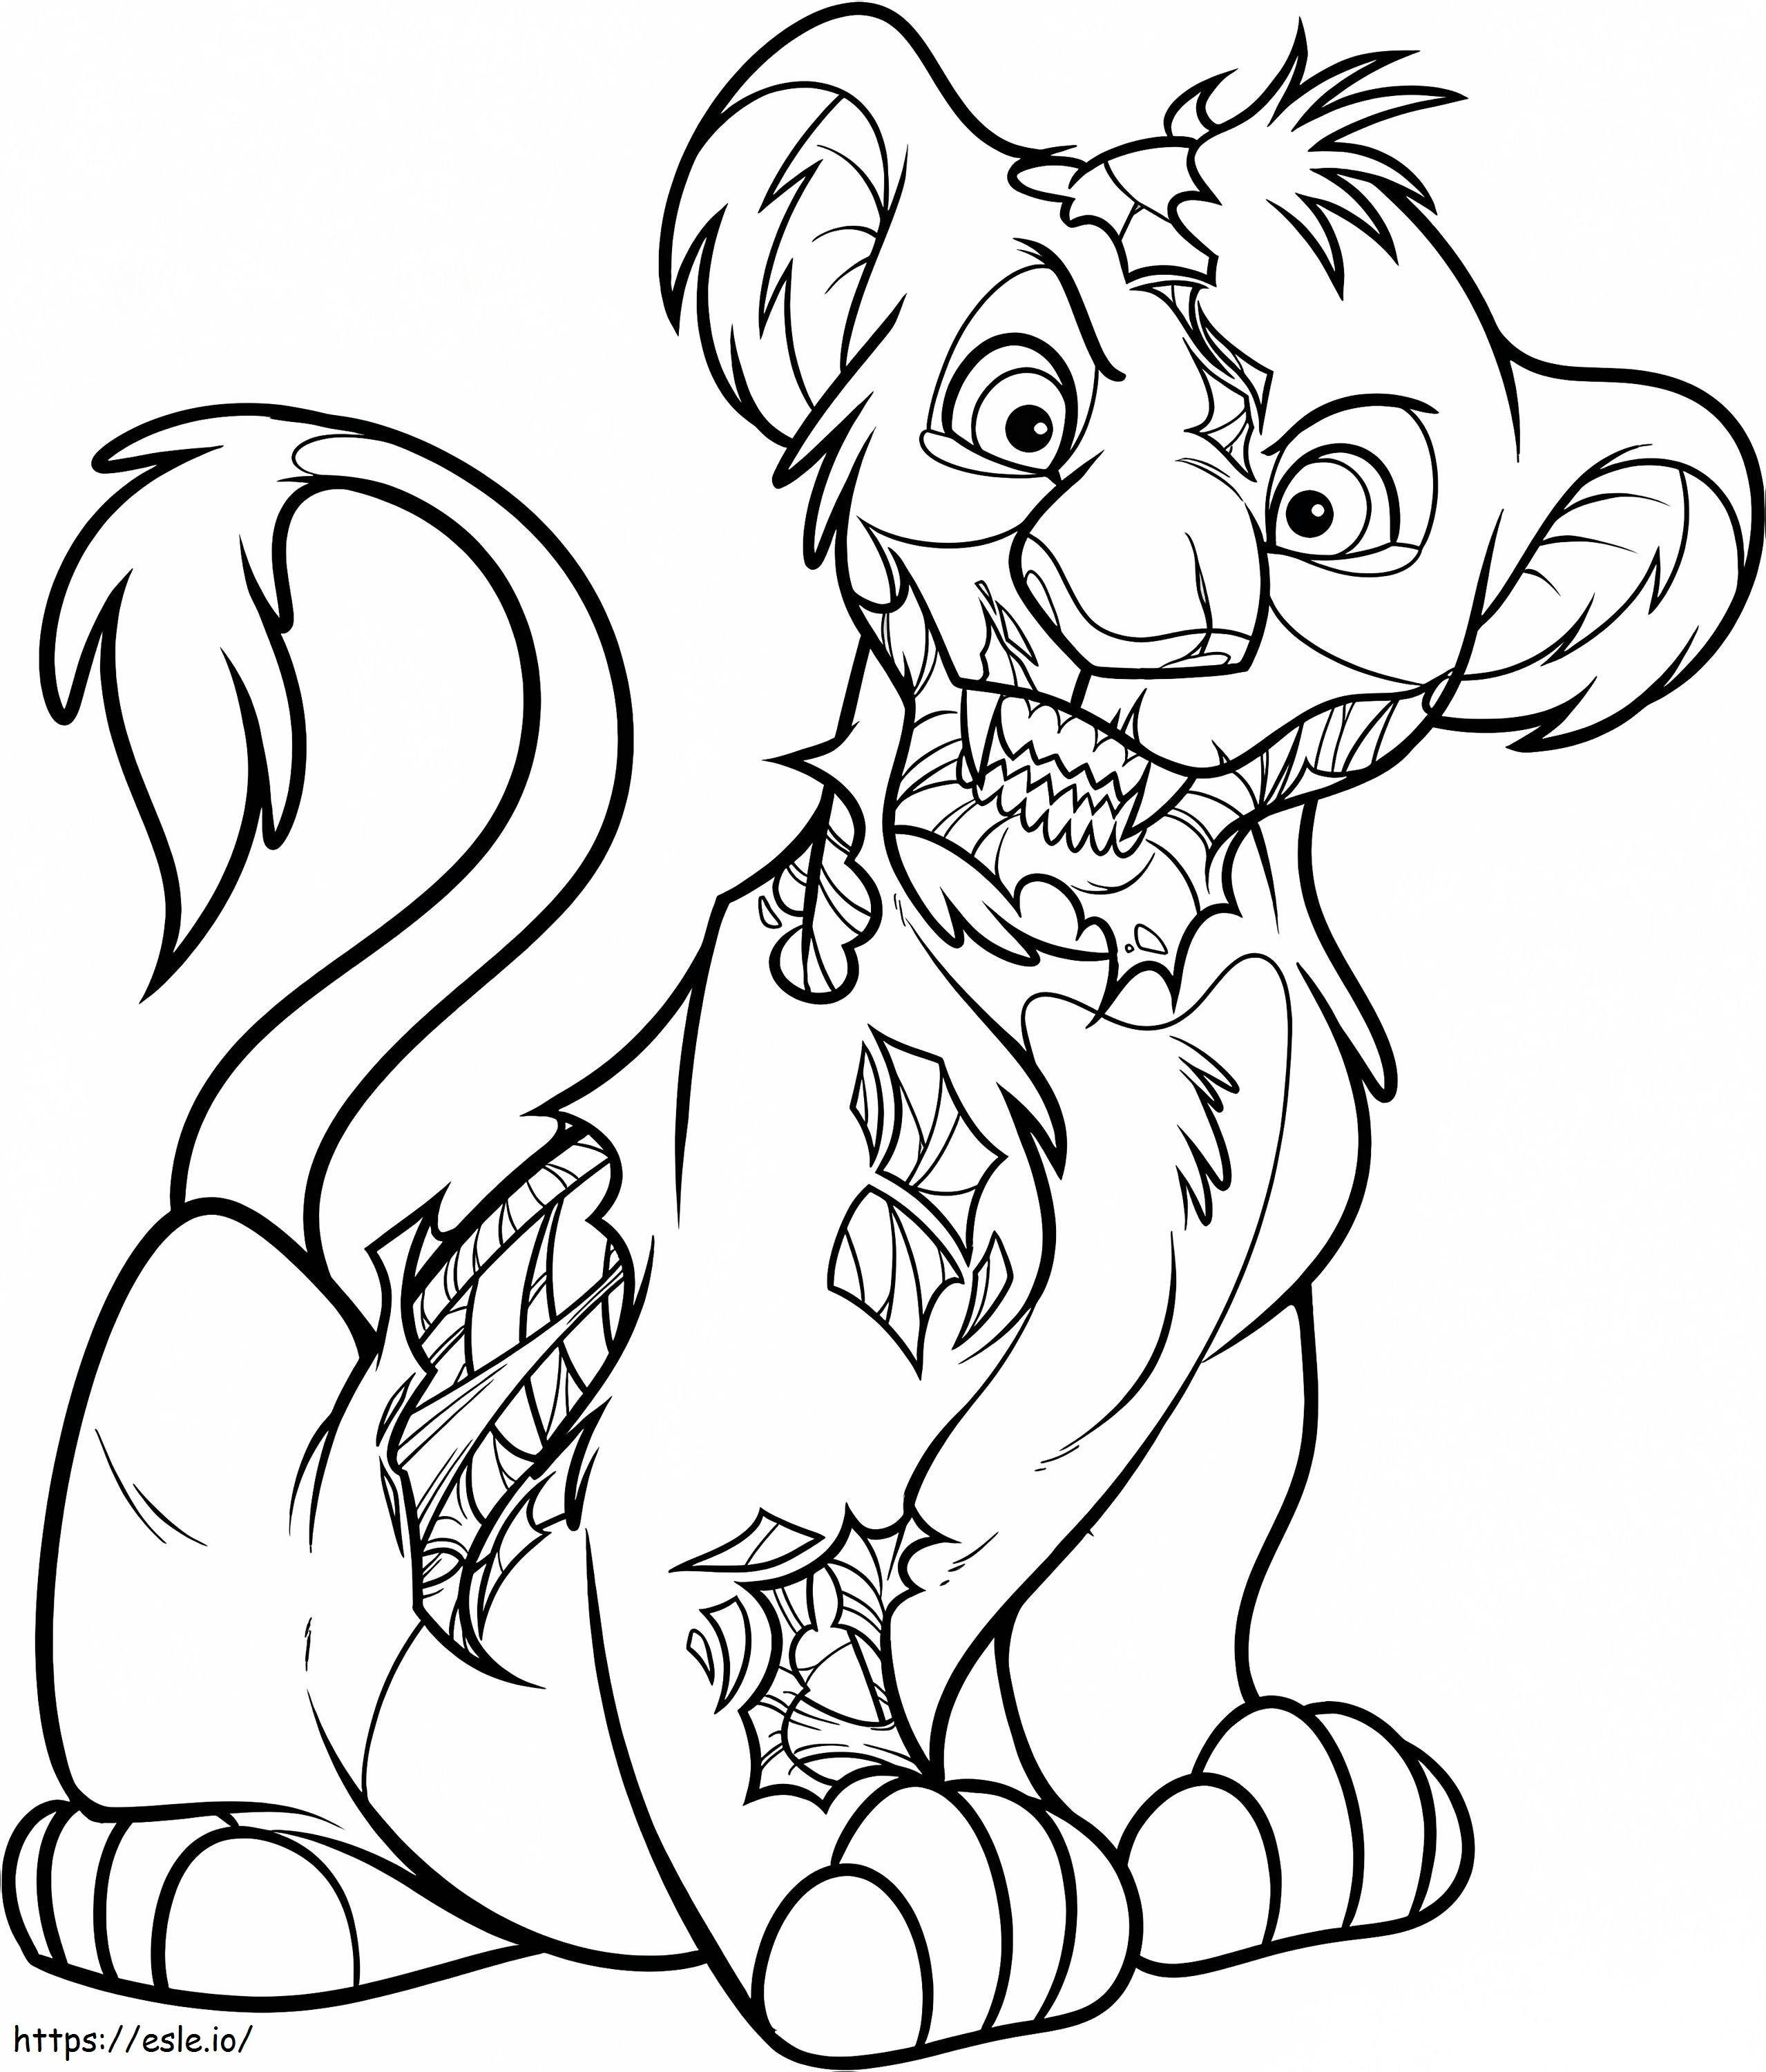 Zombie Power coloring page